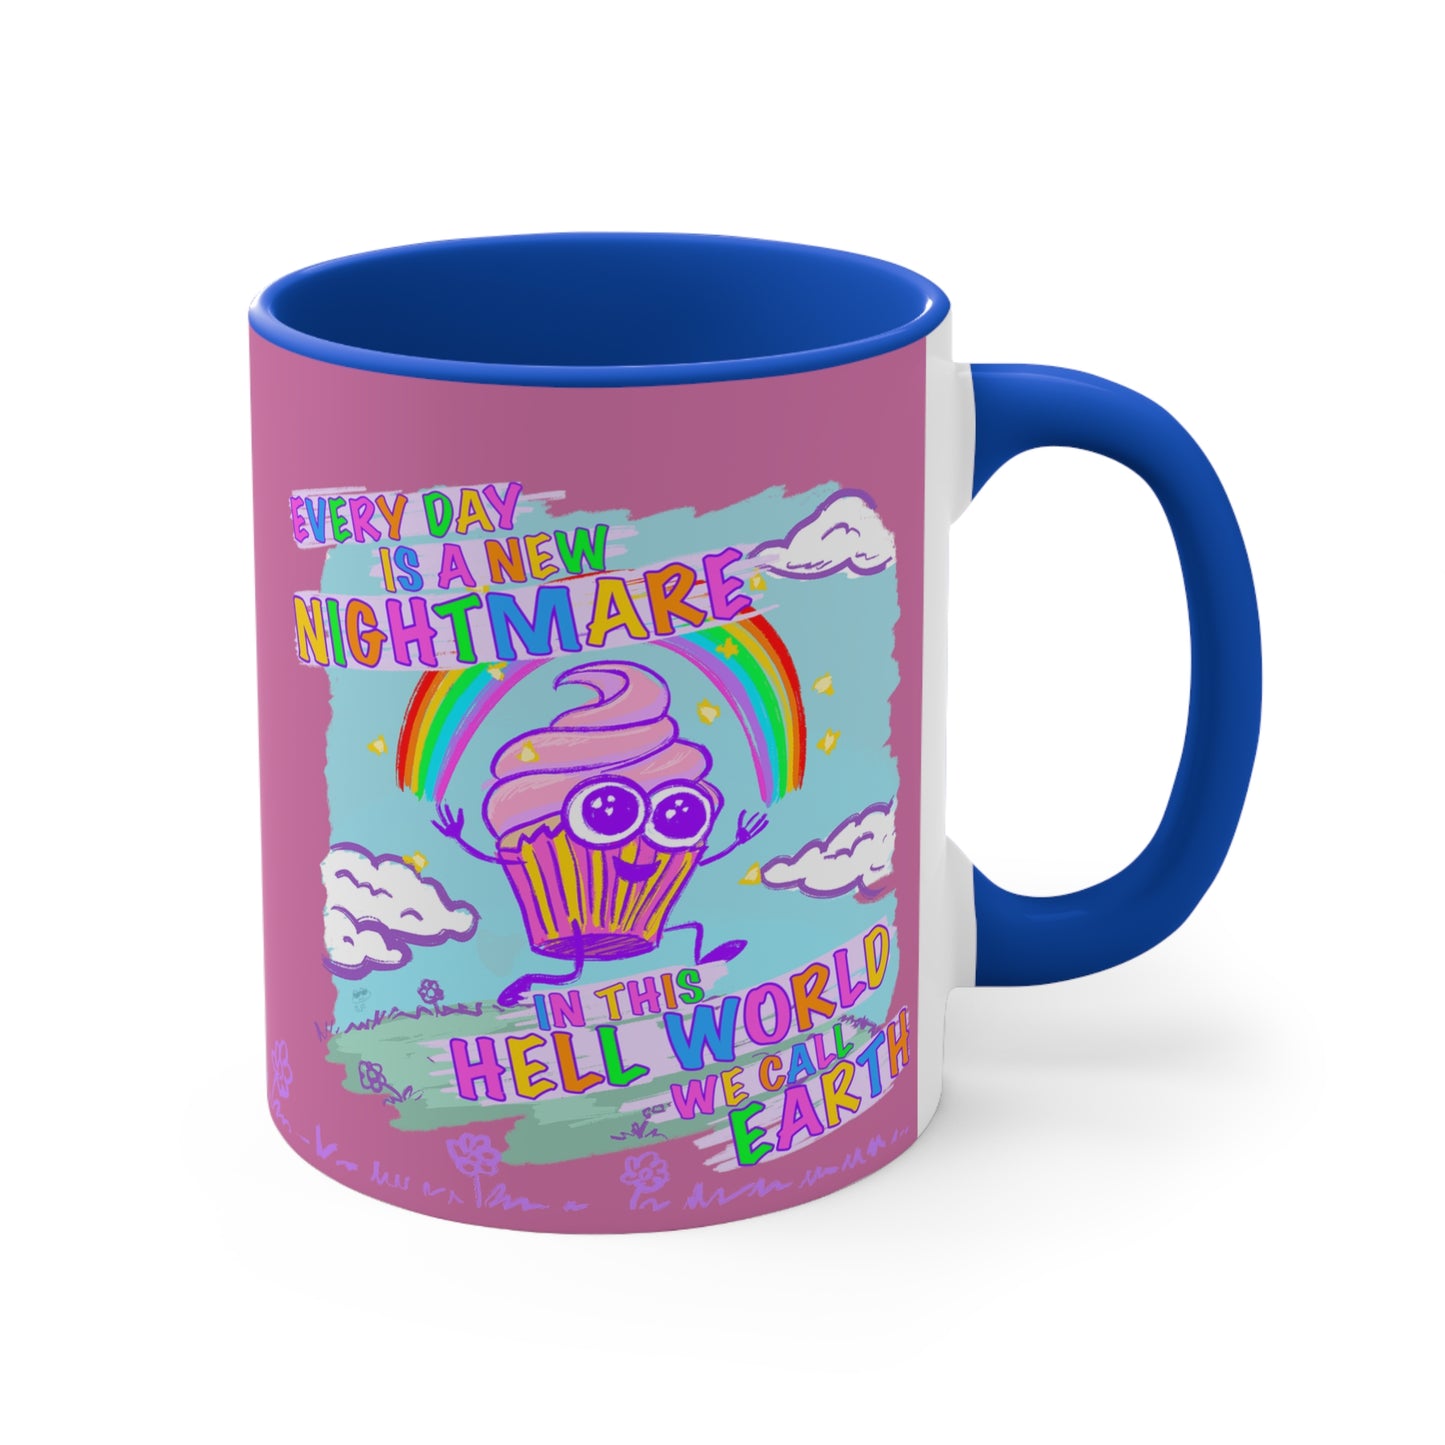 "Hell World" - Colorful Accent Mugs, 11oz